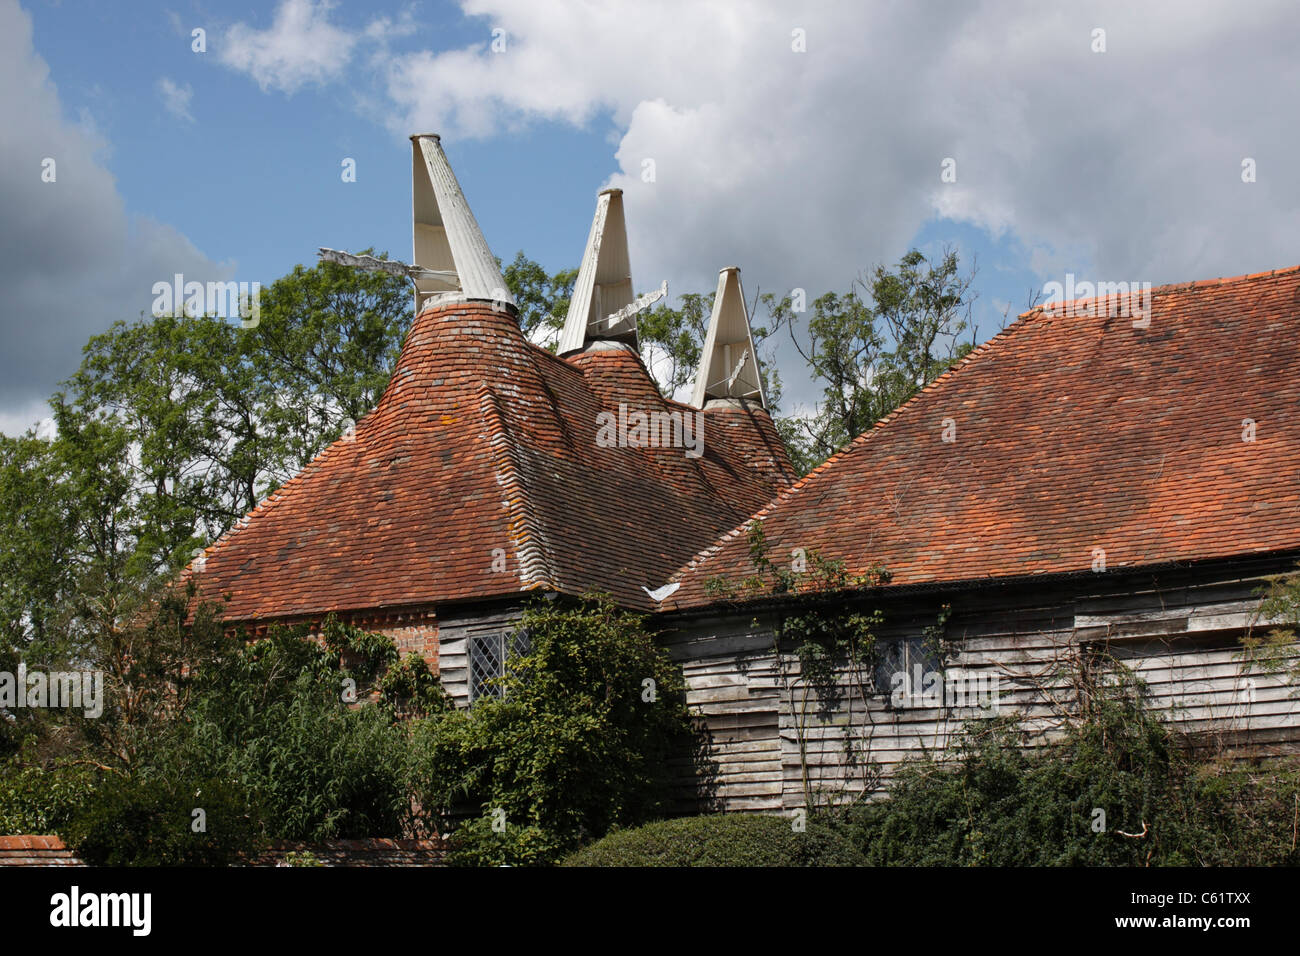 THE TRADITIONAL OAST HOUSE AT GREAT DIXTER. EAST SUSSEX UK. Stock Photo